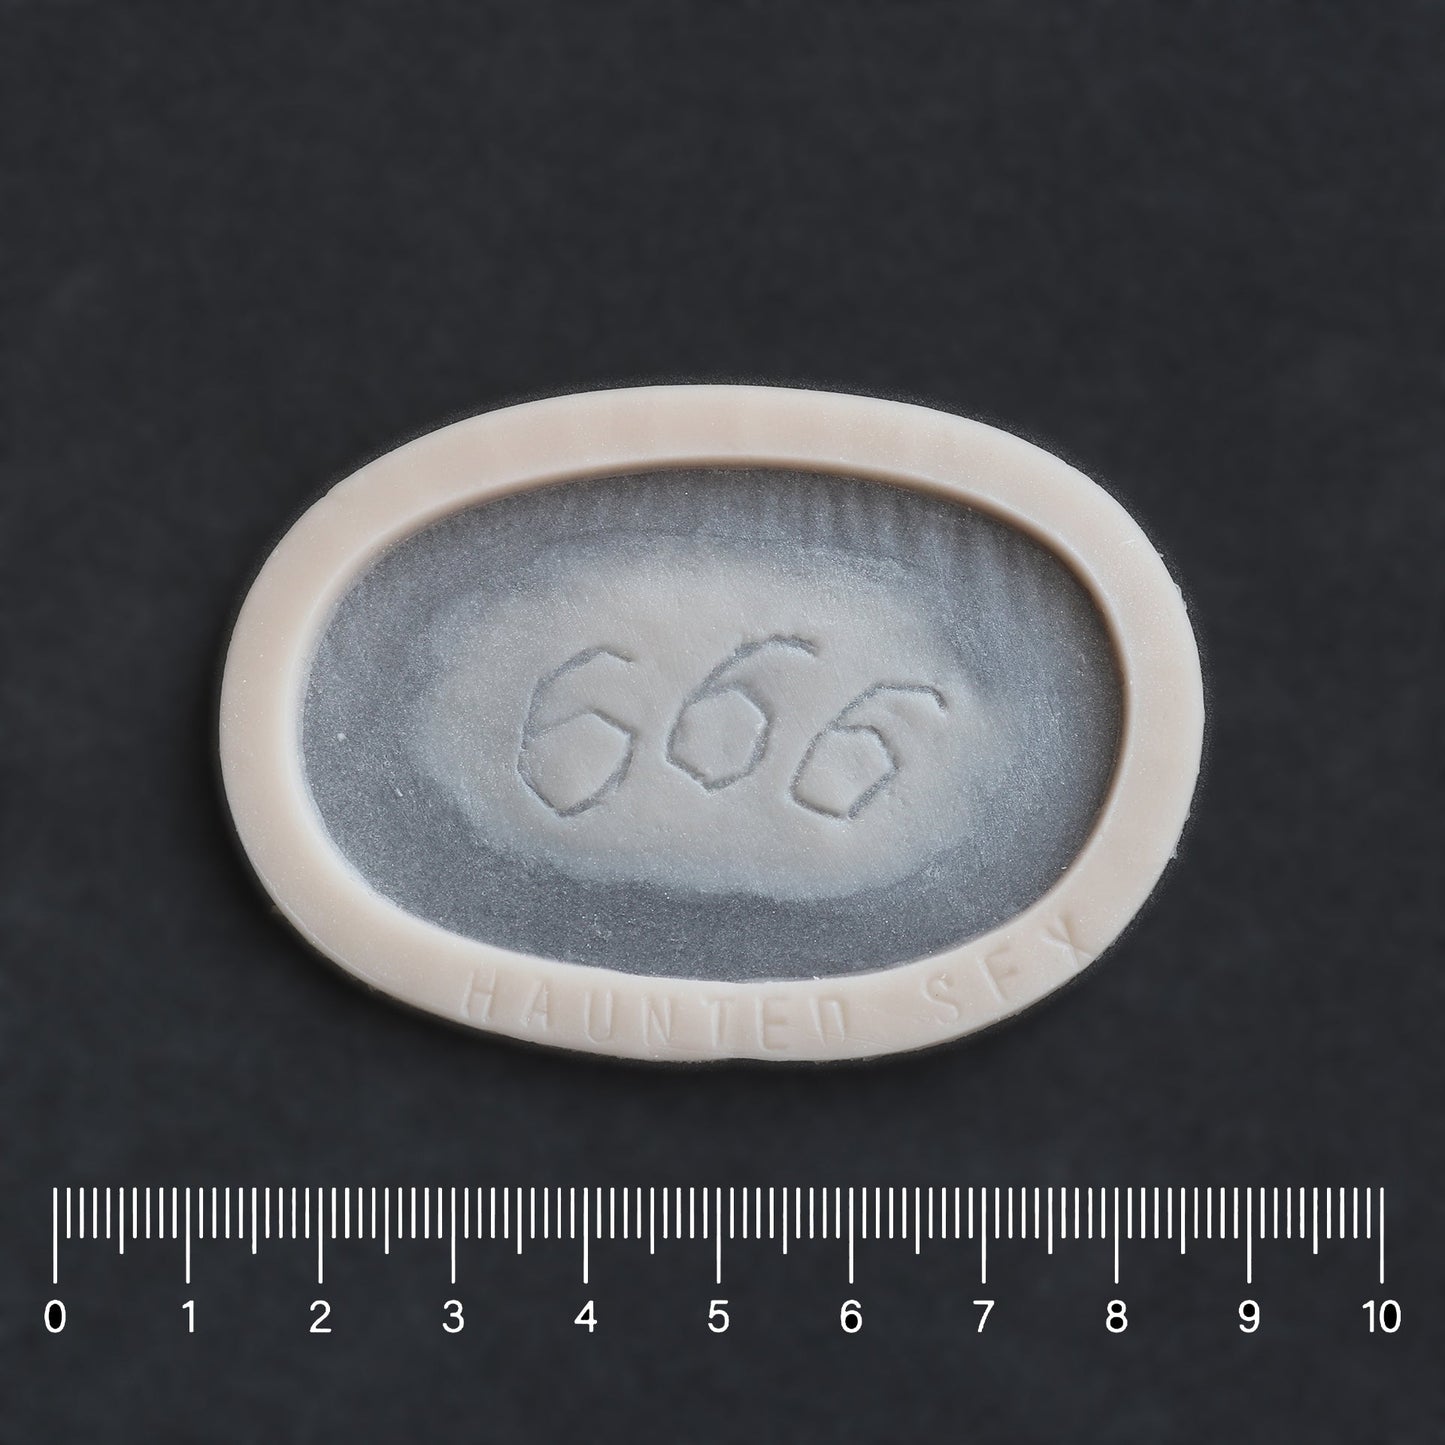 666 Carving prosthetic in vanilla shade on a black surface with a ruler